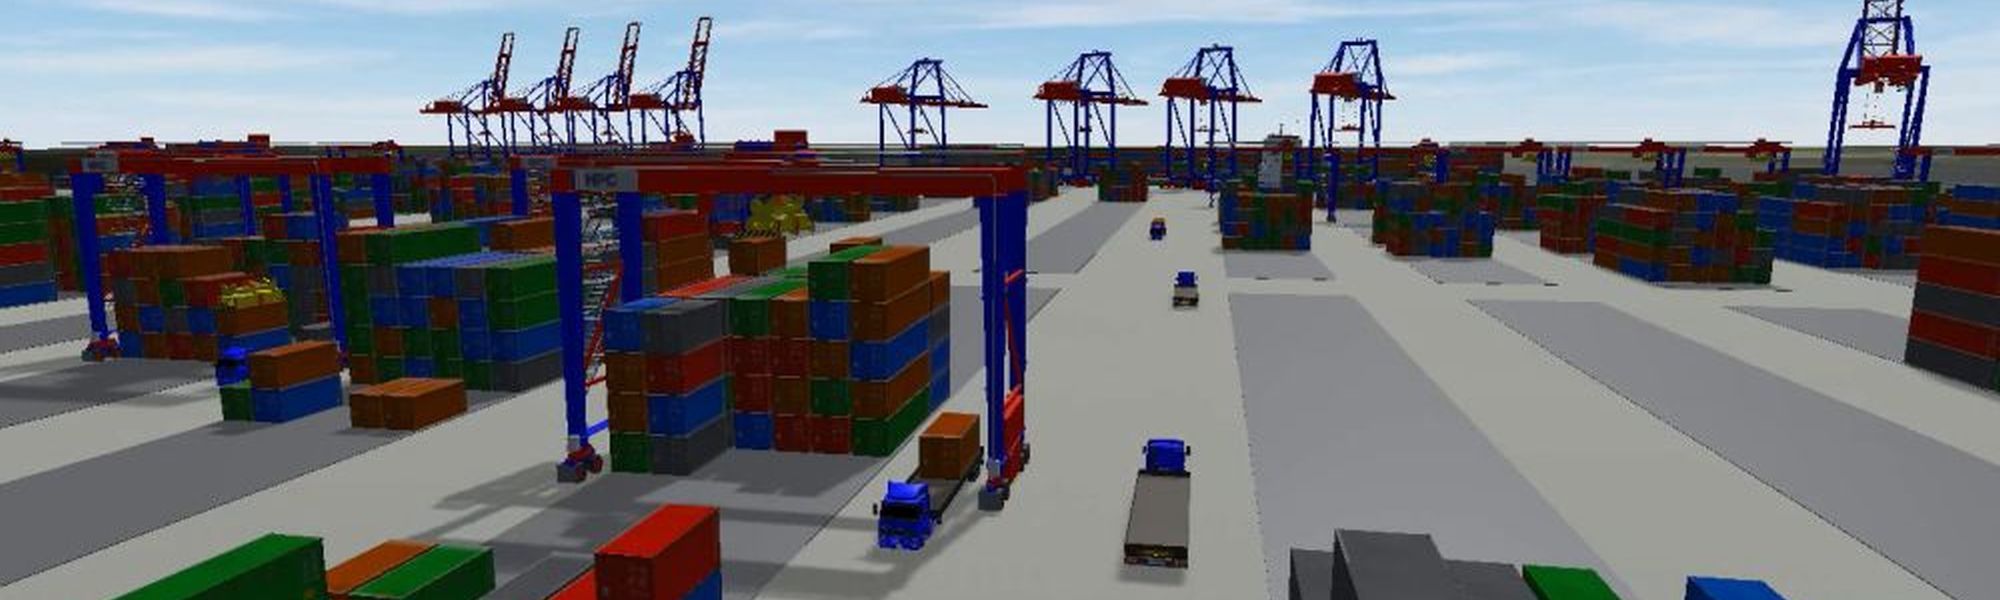 Terminal Planning and Simulation Study for Wando Welch Terminal